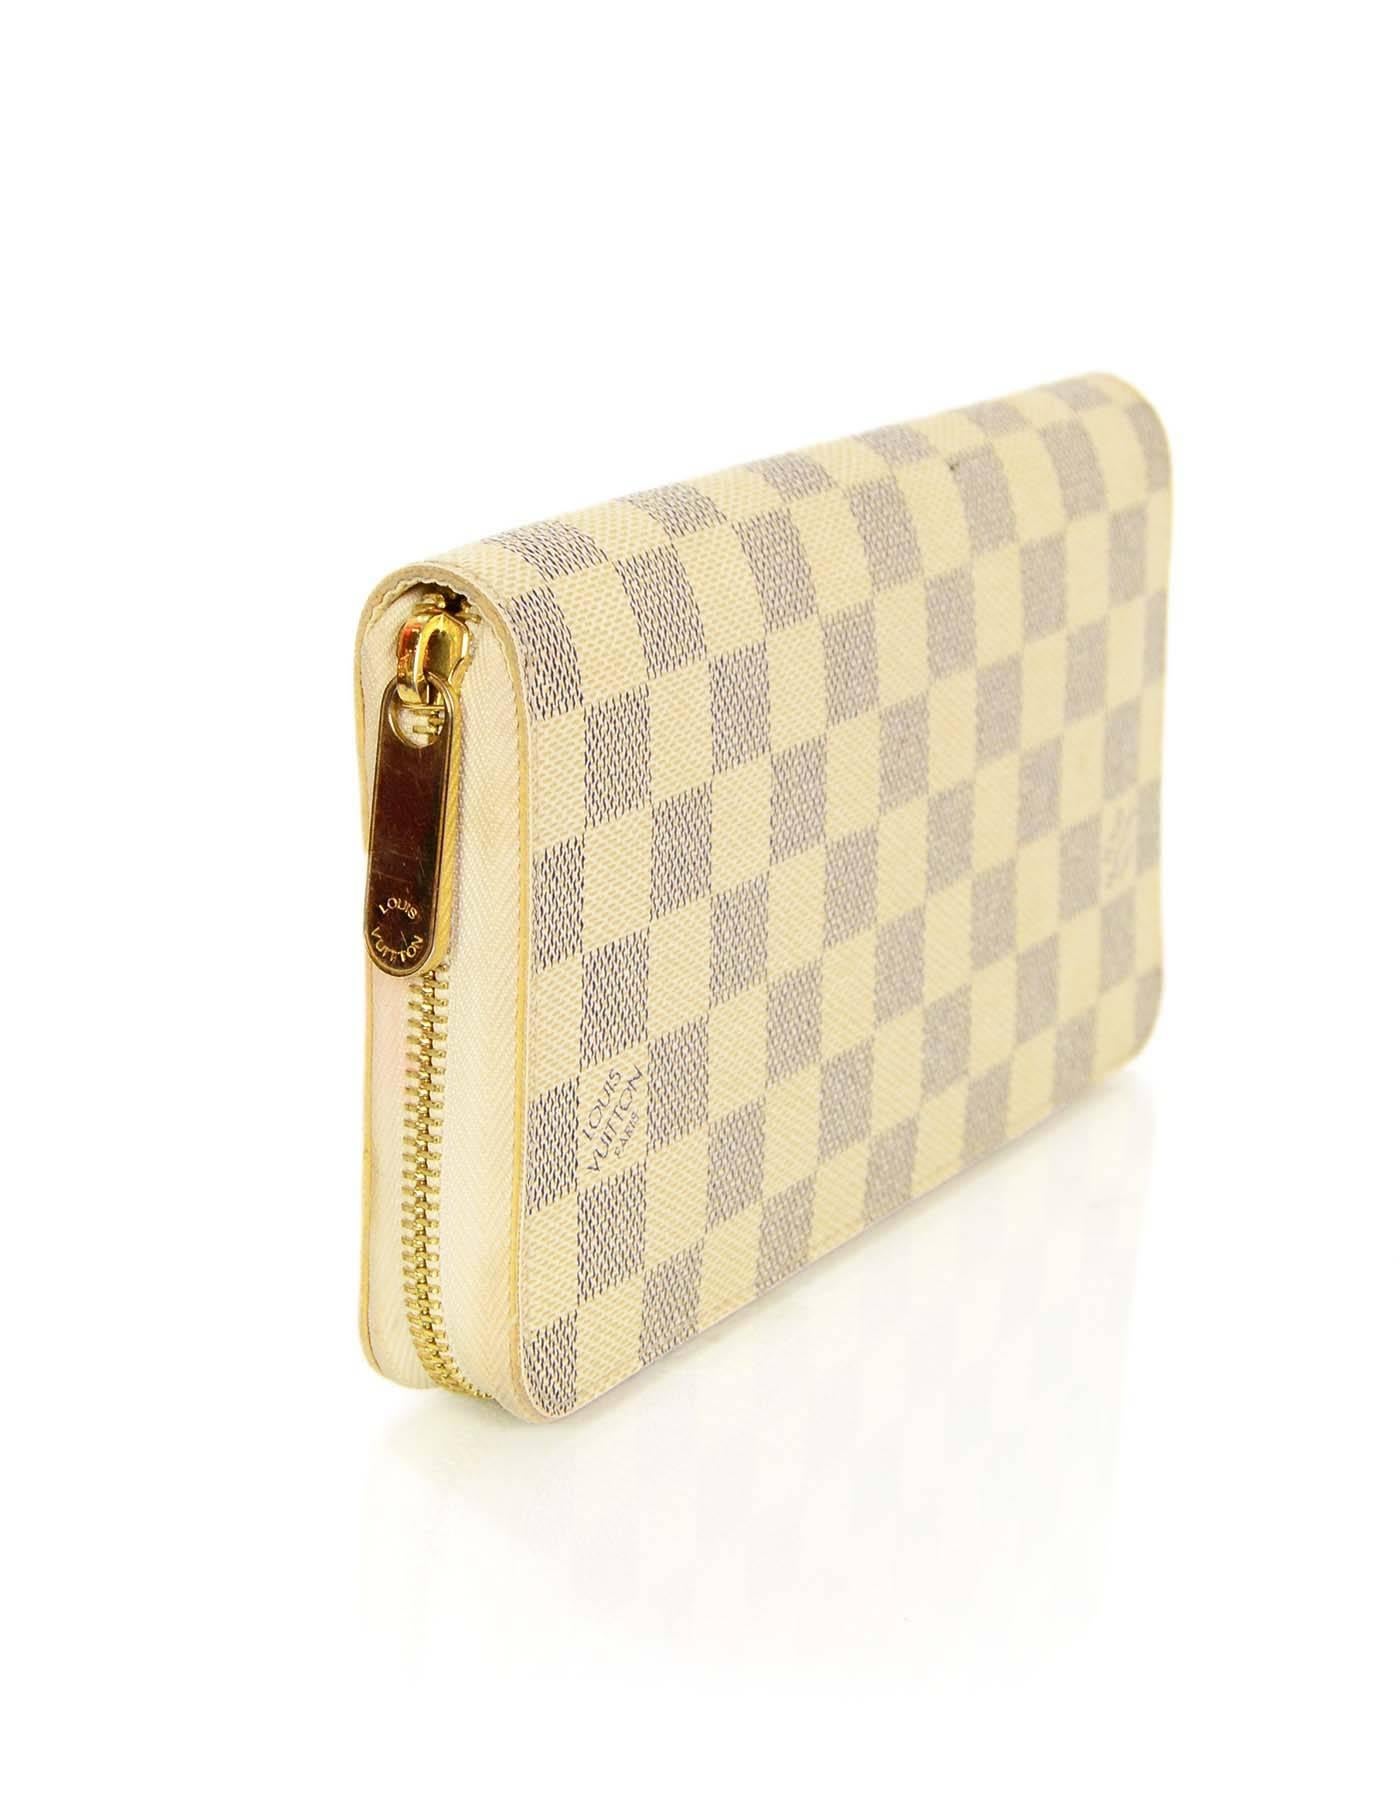 Louis Vuitton Damier Azur Zippy Organizer Wallet

Made In: France
Color: Blue and cream
Hardware: Goldtone
Materials: Coated canvas and metal
Year of Production: 2007
Serial Number/Date Code: VI3087
Lining: Cream coated